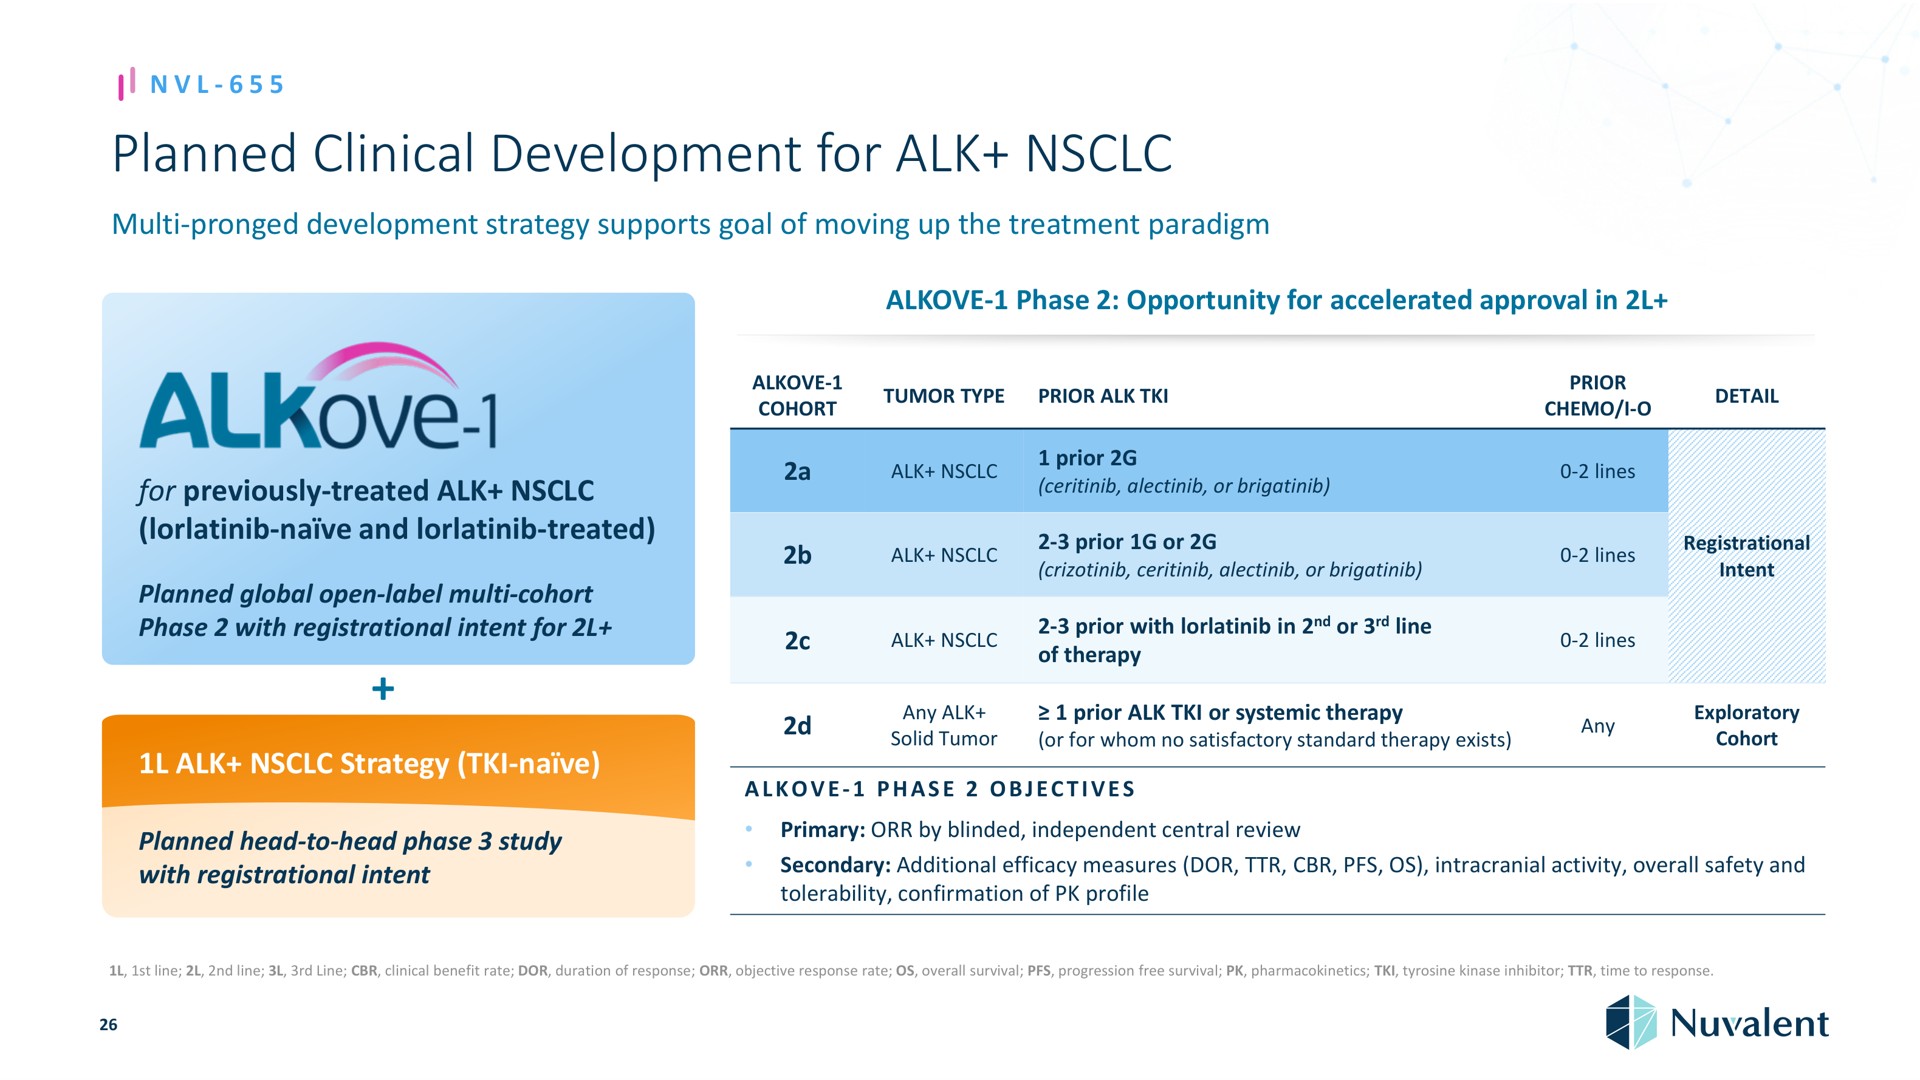 planned clinical development for alk pronged strategy supports goal of moving up the treatment paradigm previously treated naive and treated global open label cohort phase with registrational intent strategy naive head to head phase study with registrational intent phase opportunity accelerated approval in cohort tumor type prior prior i detail a prior or lines prior or or lines registrational intent ale prior with in of therapy male line or eons any solid tumor prior or systemic therapy or whom no satisfactory standard therapy exists an exploratory cohort phase objectives primary by blinded independent central review secondary additional efficacy measures dor intracranial activity overall safety and tolerability confirmation of profile line line line benefit rate dor duration of response objective response rate overall survival progression free survival tyrosine kinase inhibitor time to response | Nuvalent